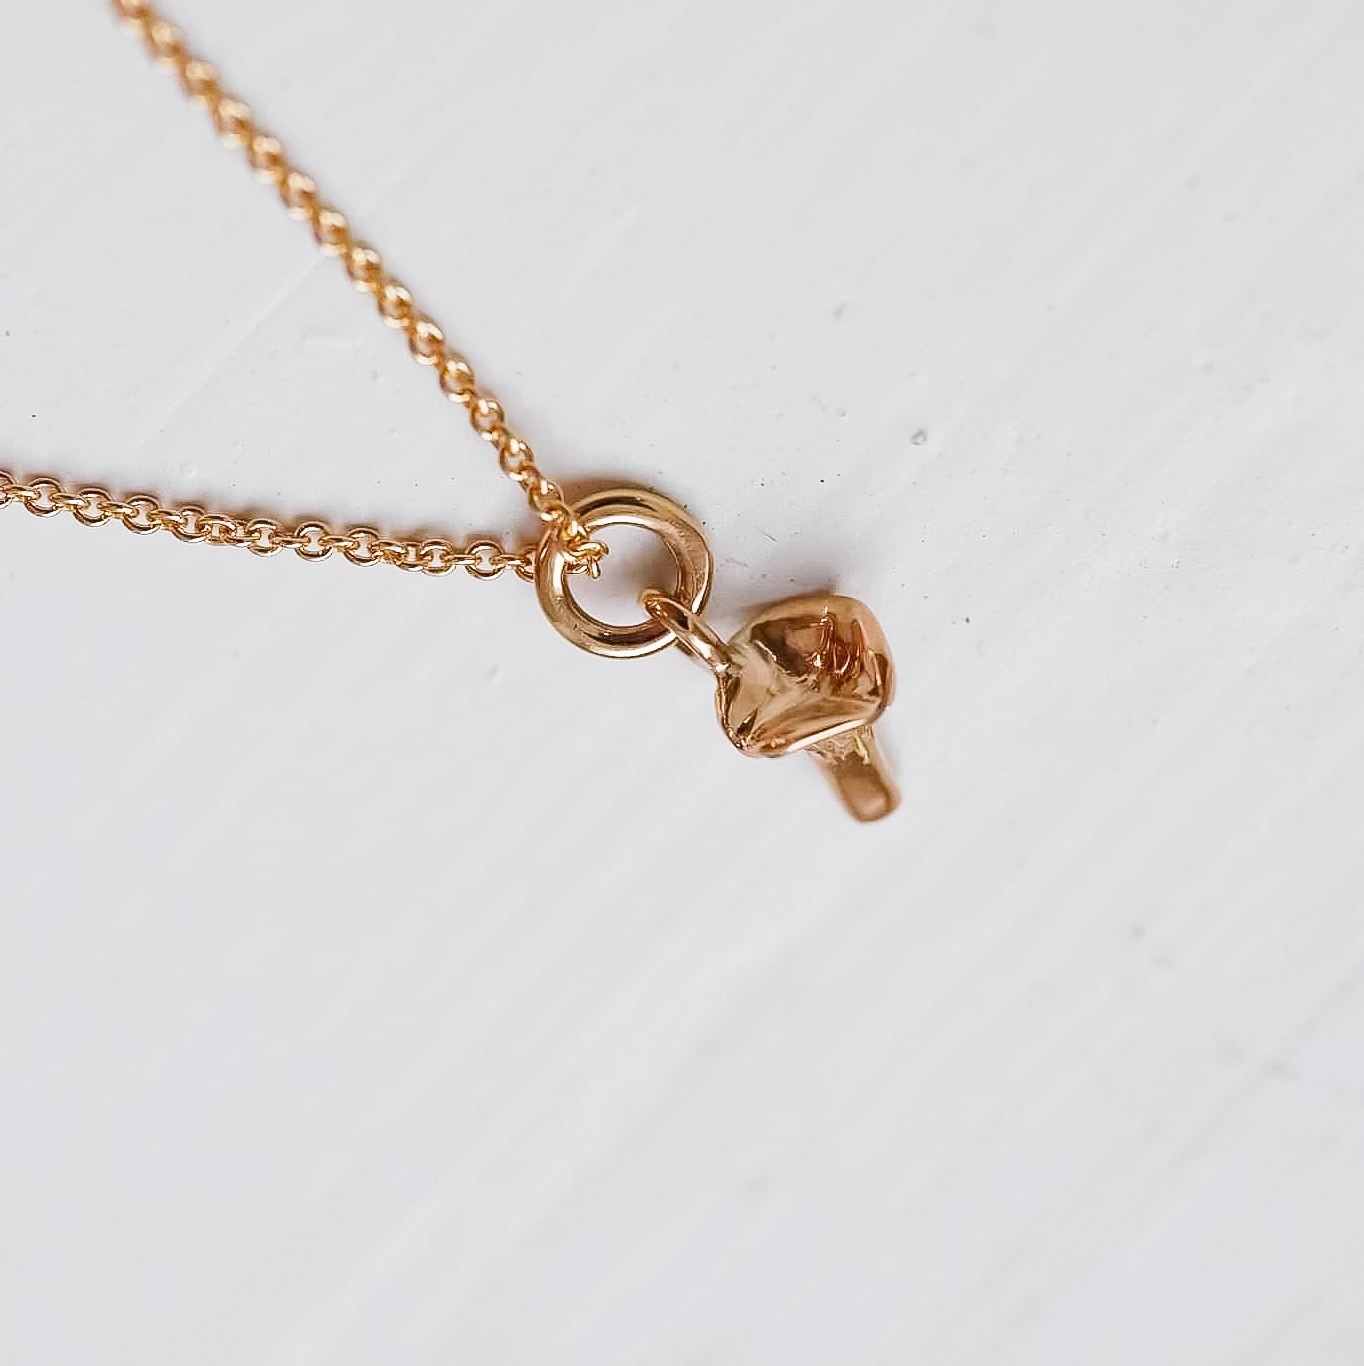 "Chantarelle" in gold